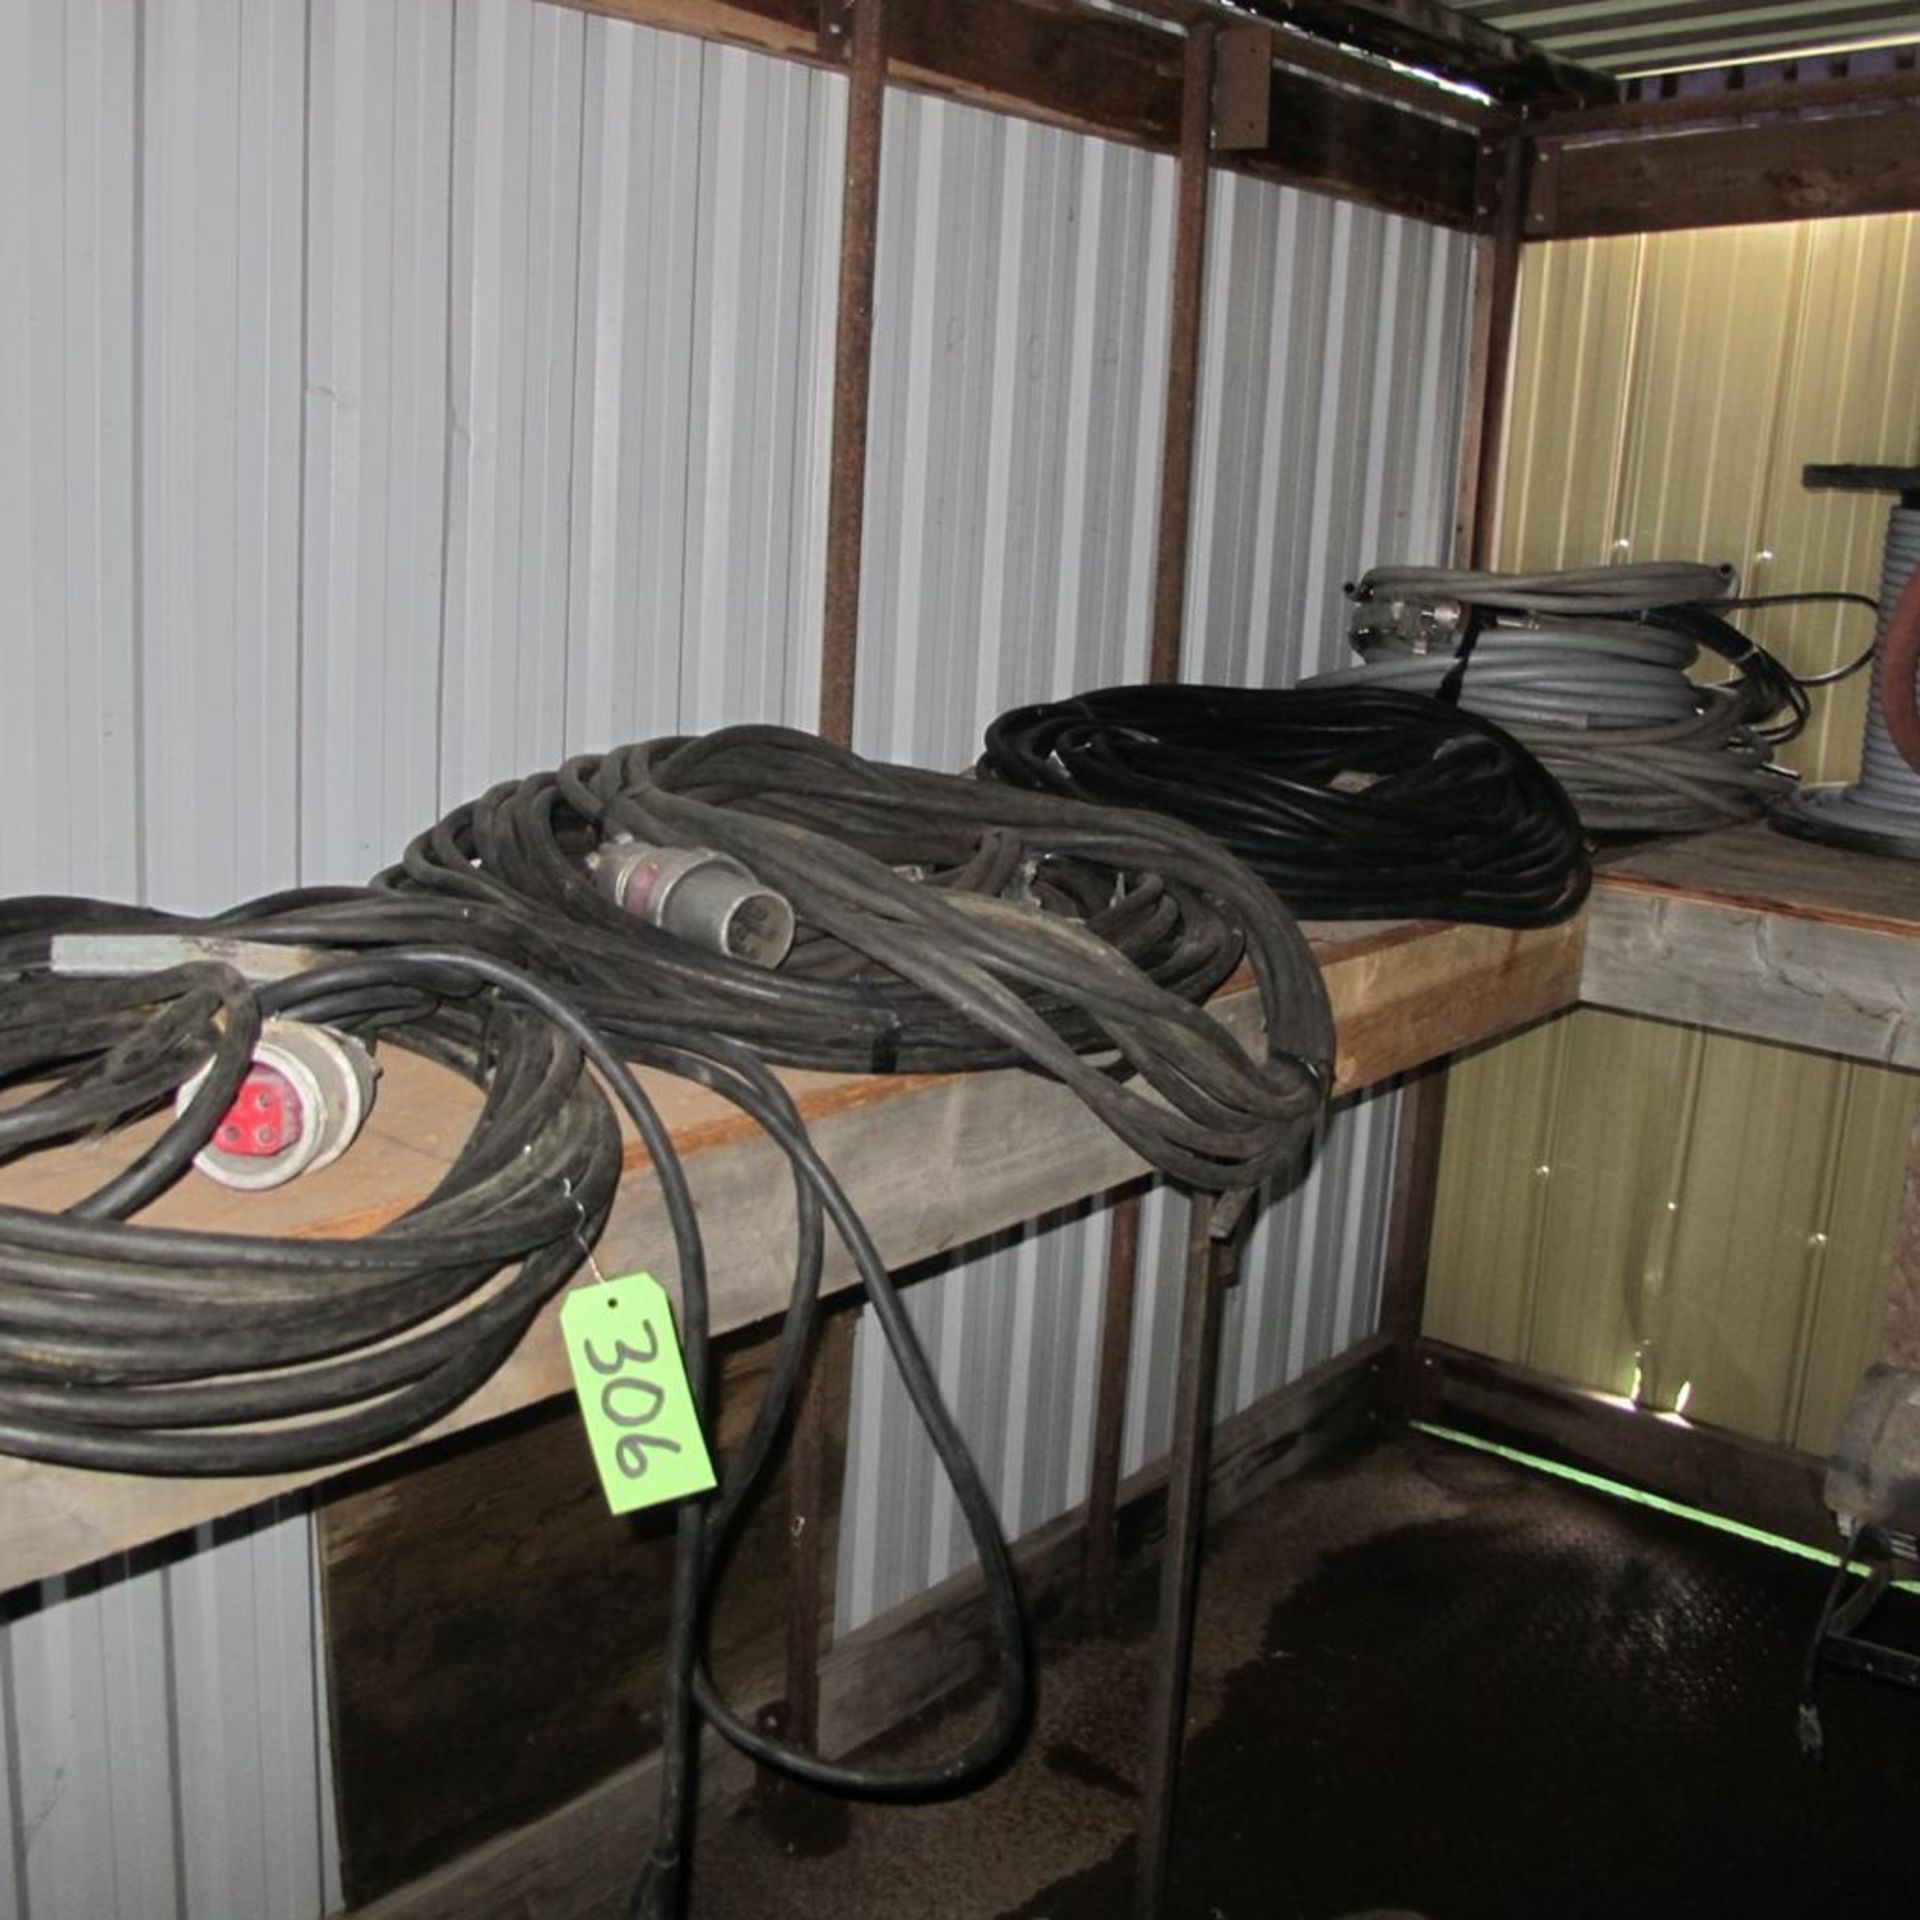 WELDING CABLES, HOSES, ROPE ON SHELF (NORTH BLDG)